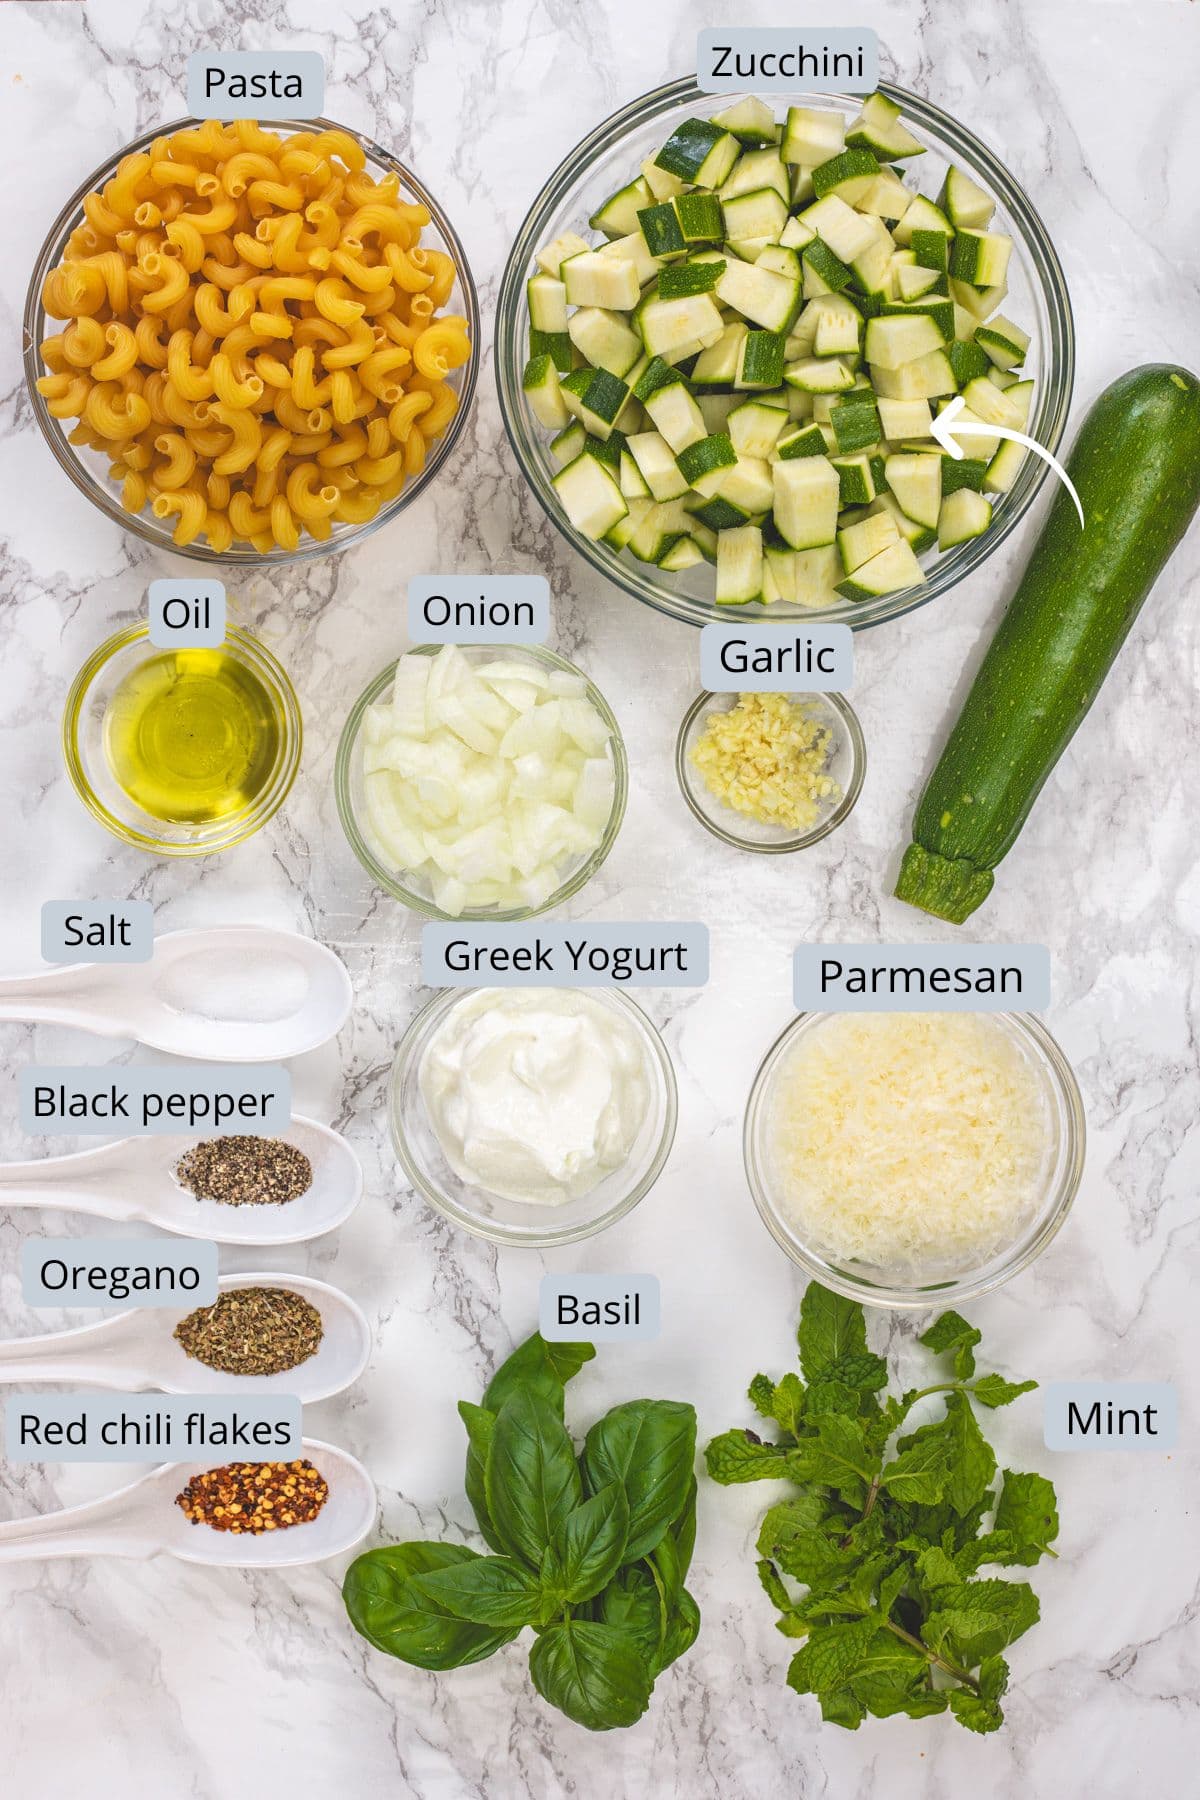 Zucchini pasta ingredients in bowls and spoons with labels.